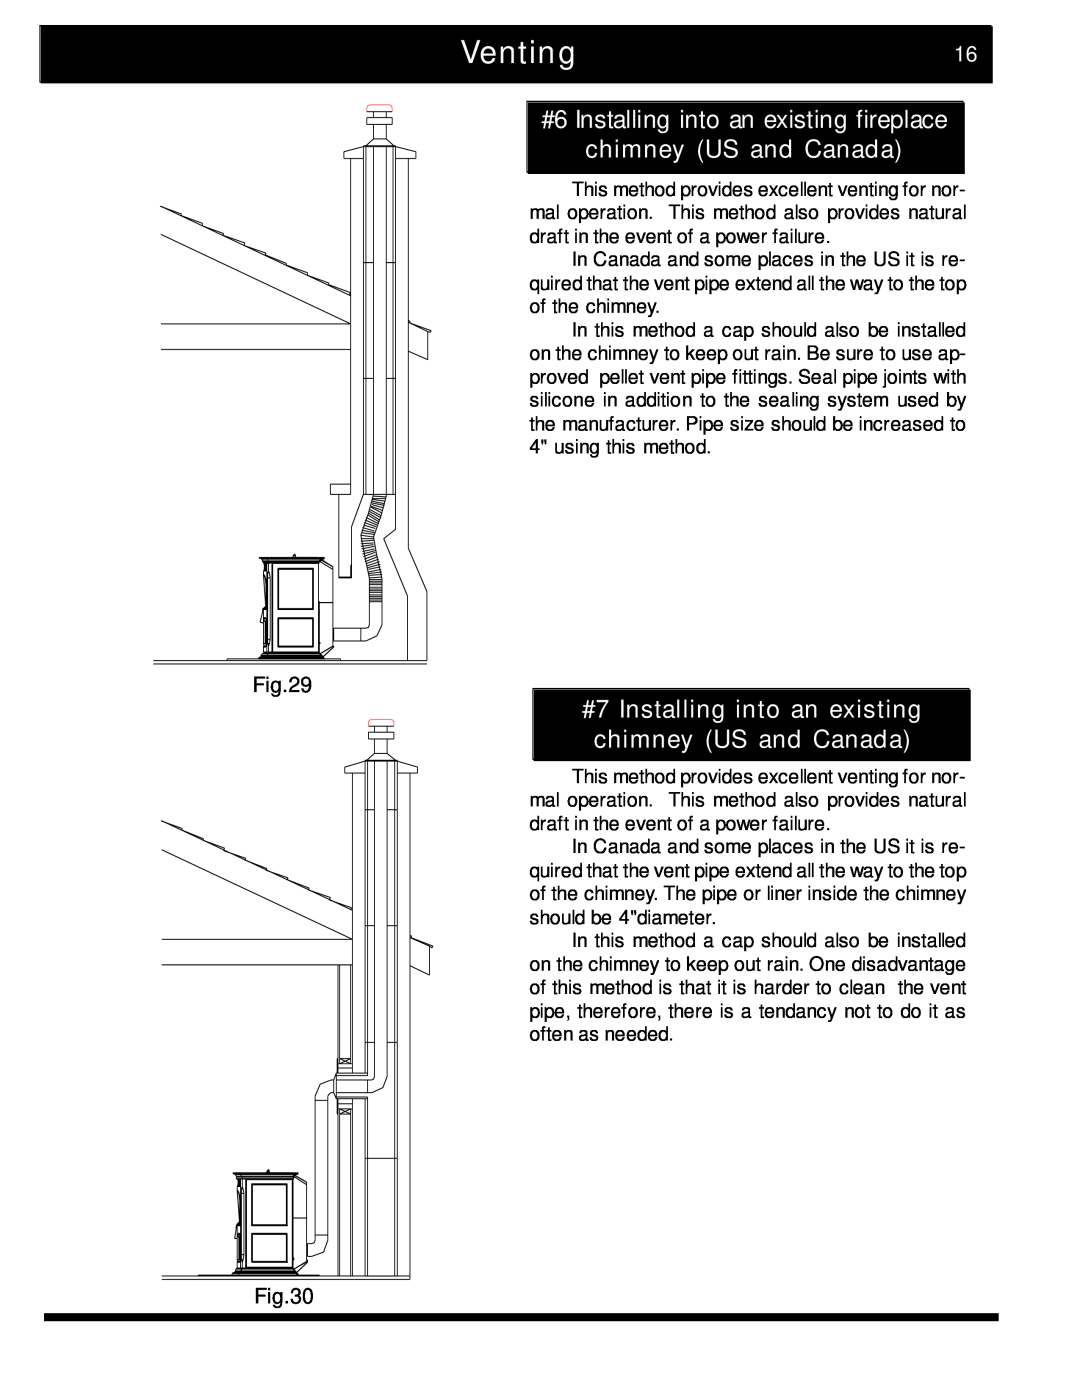 Harman Stove Company 2 manual Venting16, #6 Installing into an existing fireplace chimney US and Canada 